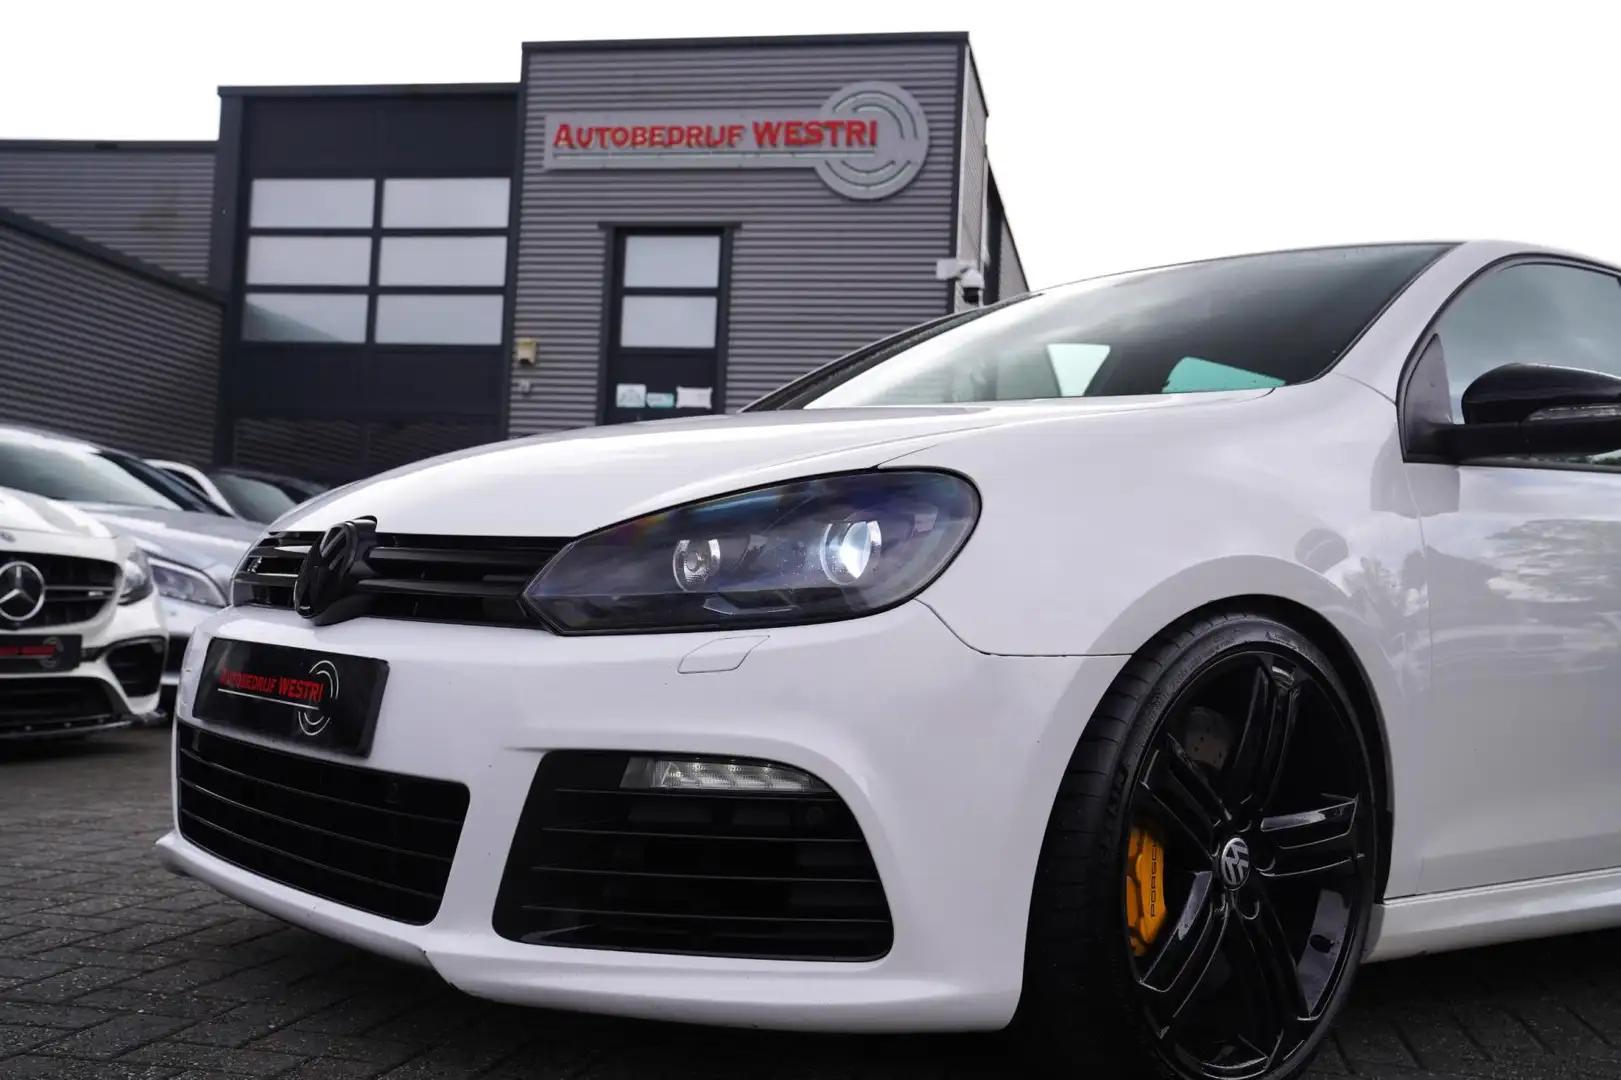 Volkswagen Golf 2.0 R 4-Motion | Xenon / LED | Automaat | 100% ond Blanco - 2